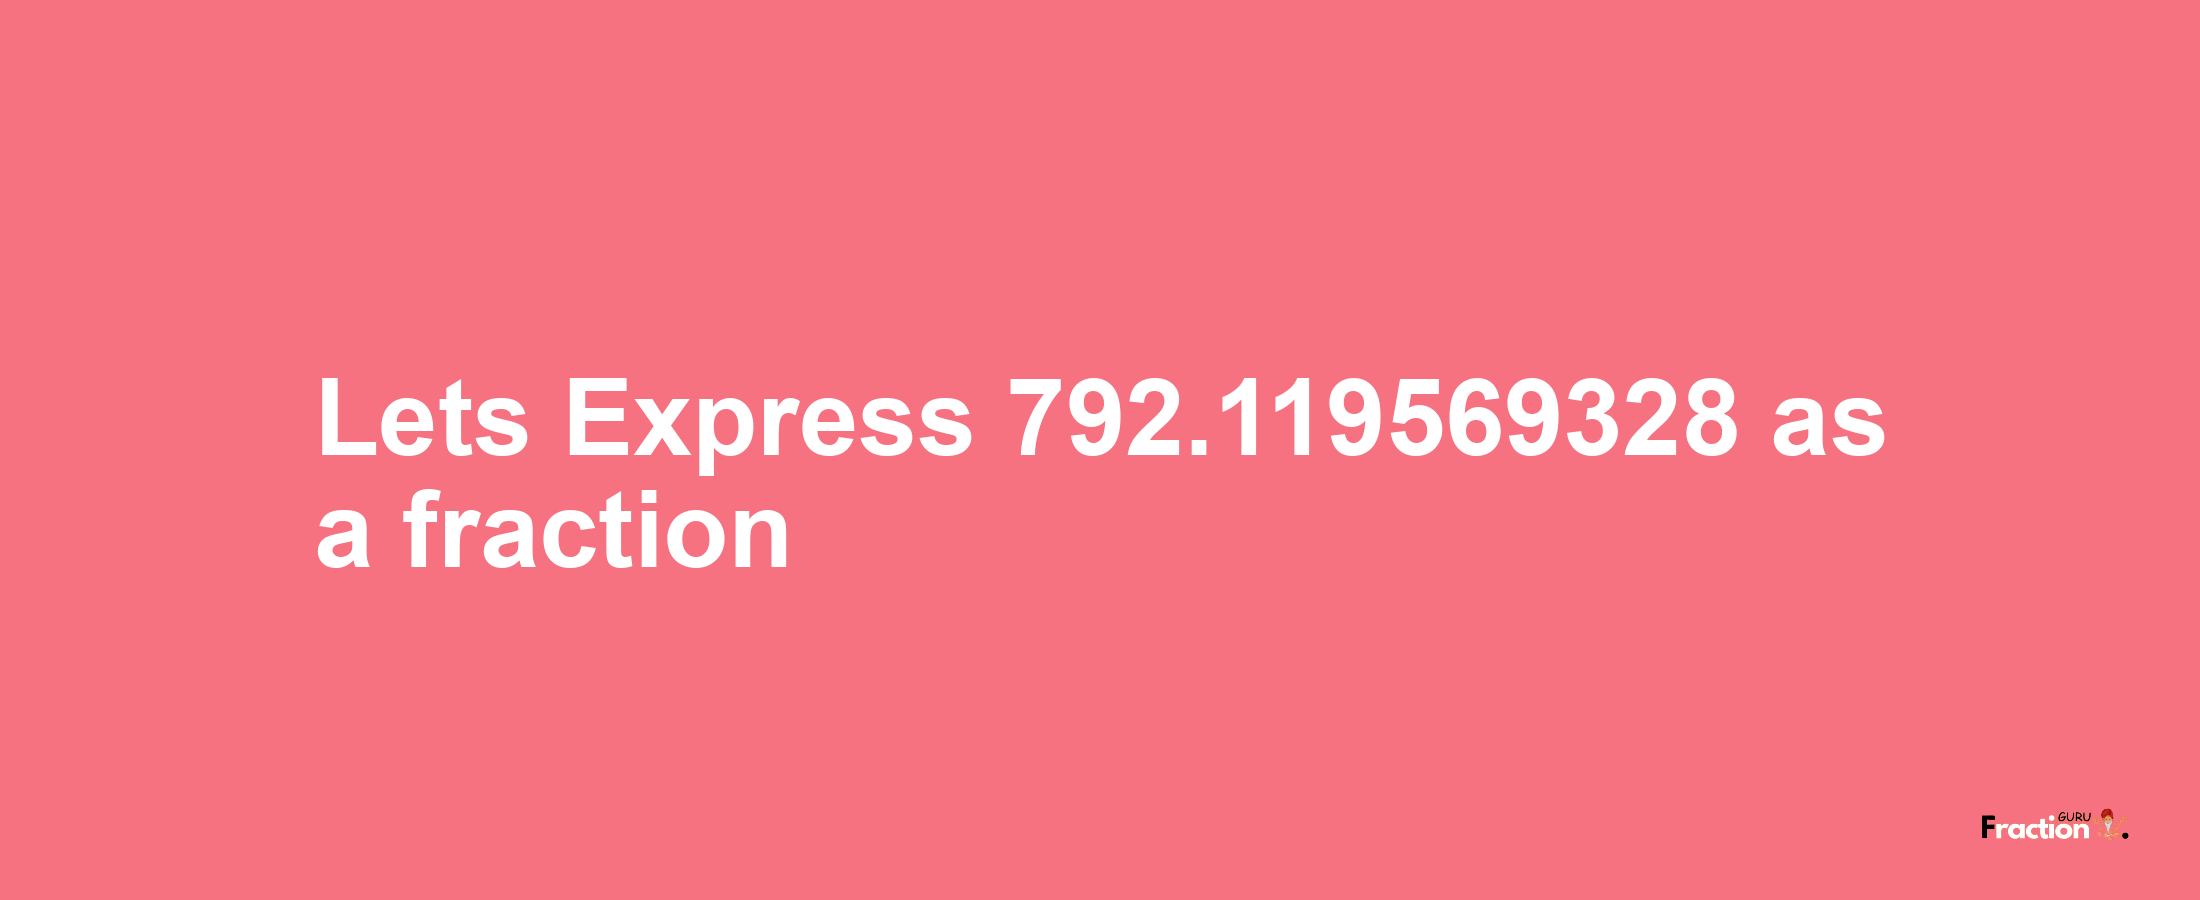 Lets Express 792.119569328 as afraction